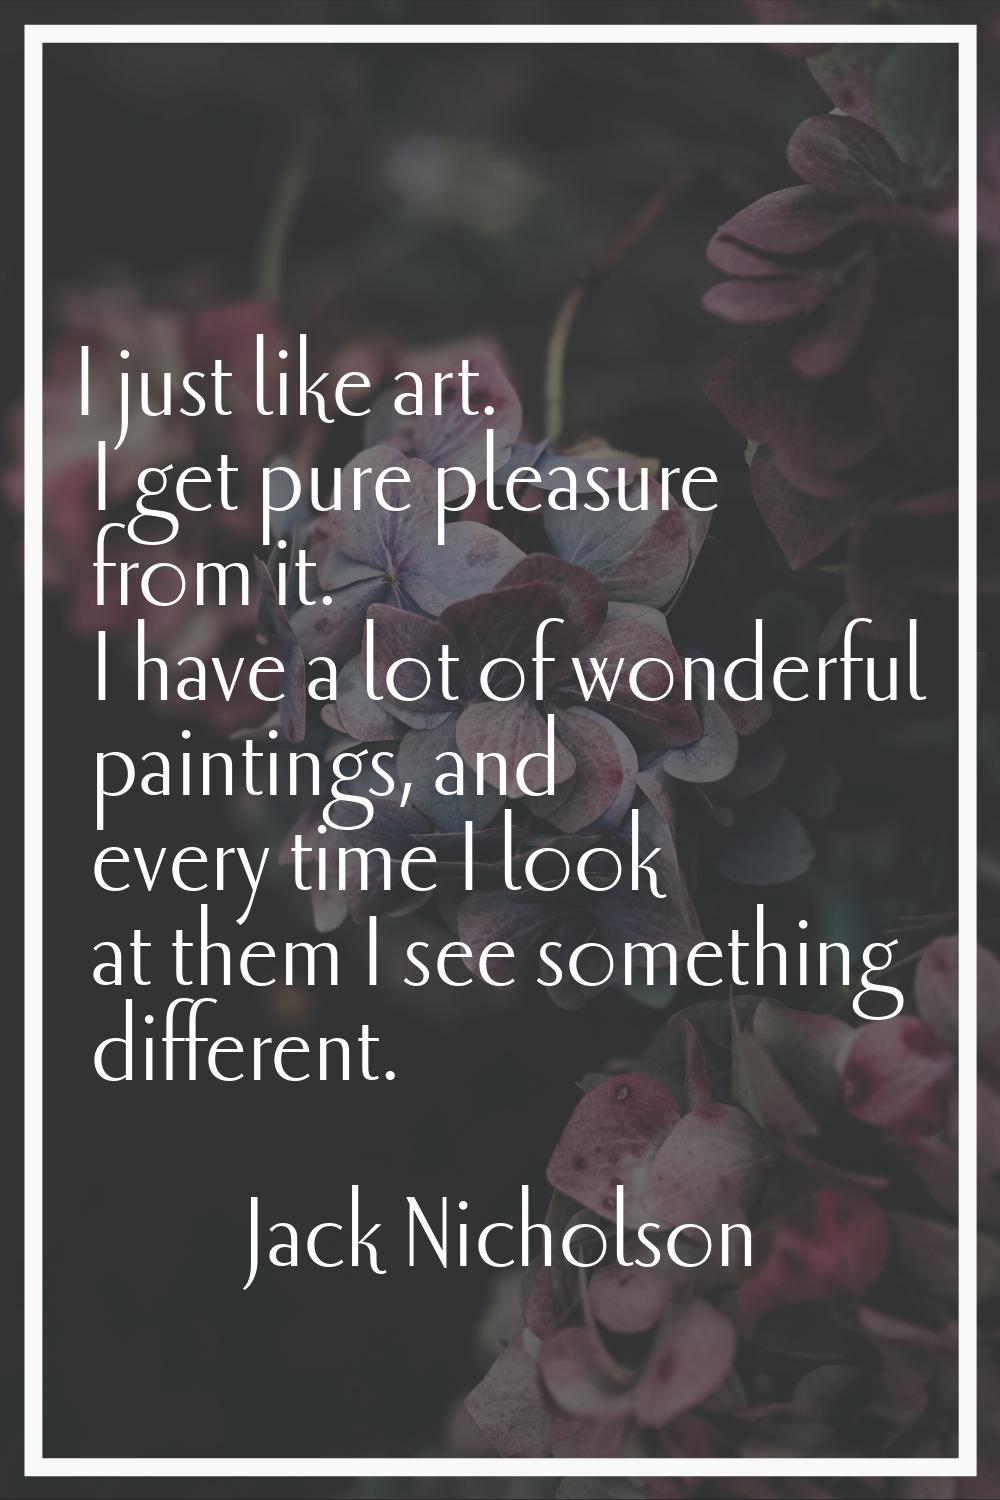 I just like art. I get pure pleasure from it. I have a lot of wonderful paintings, and every time I